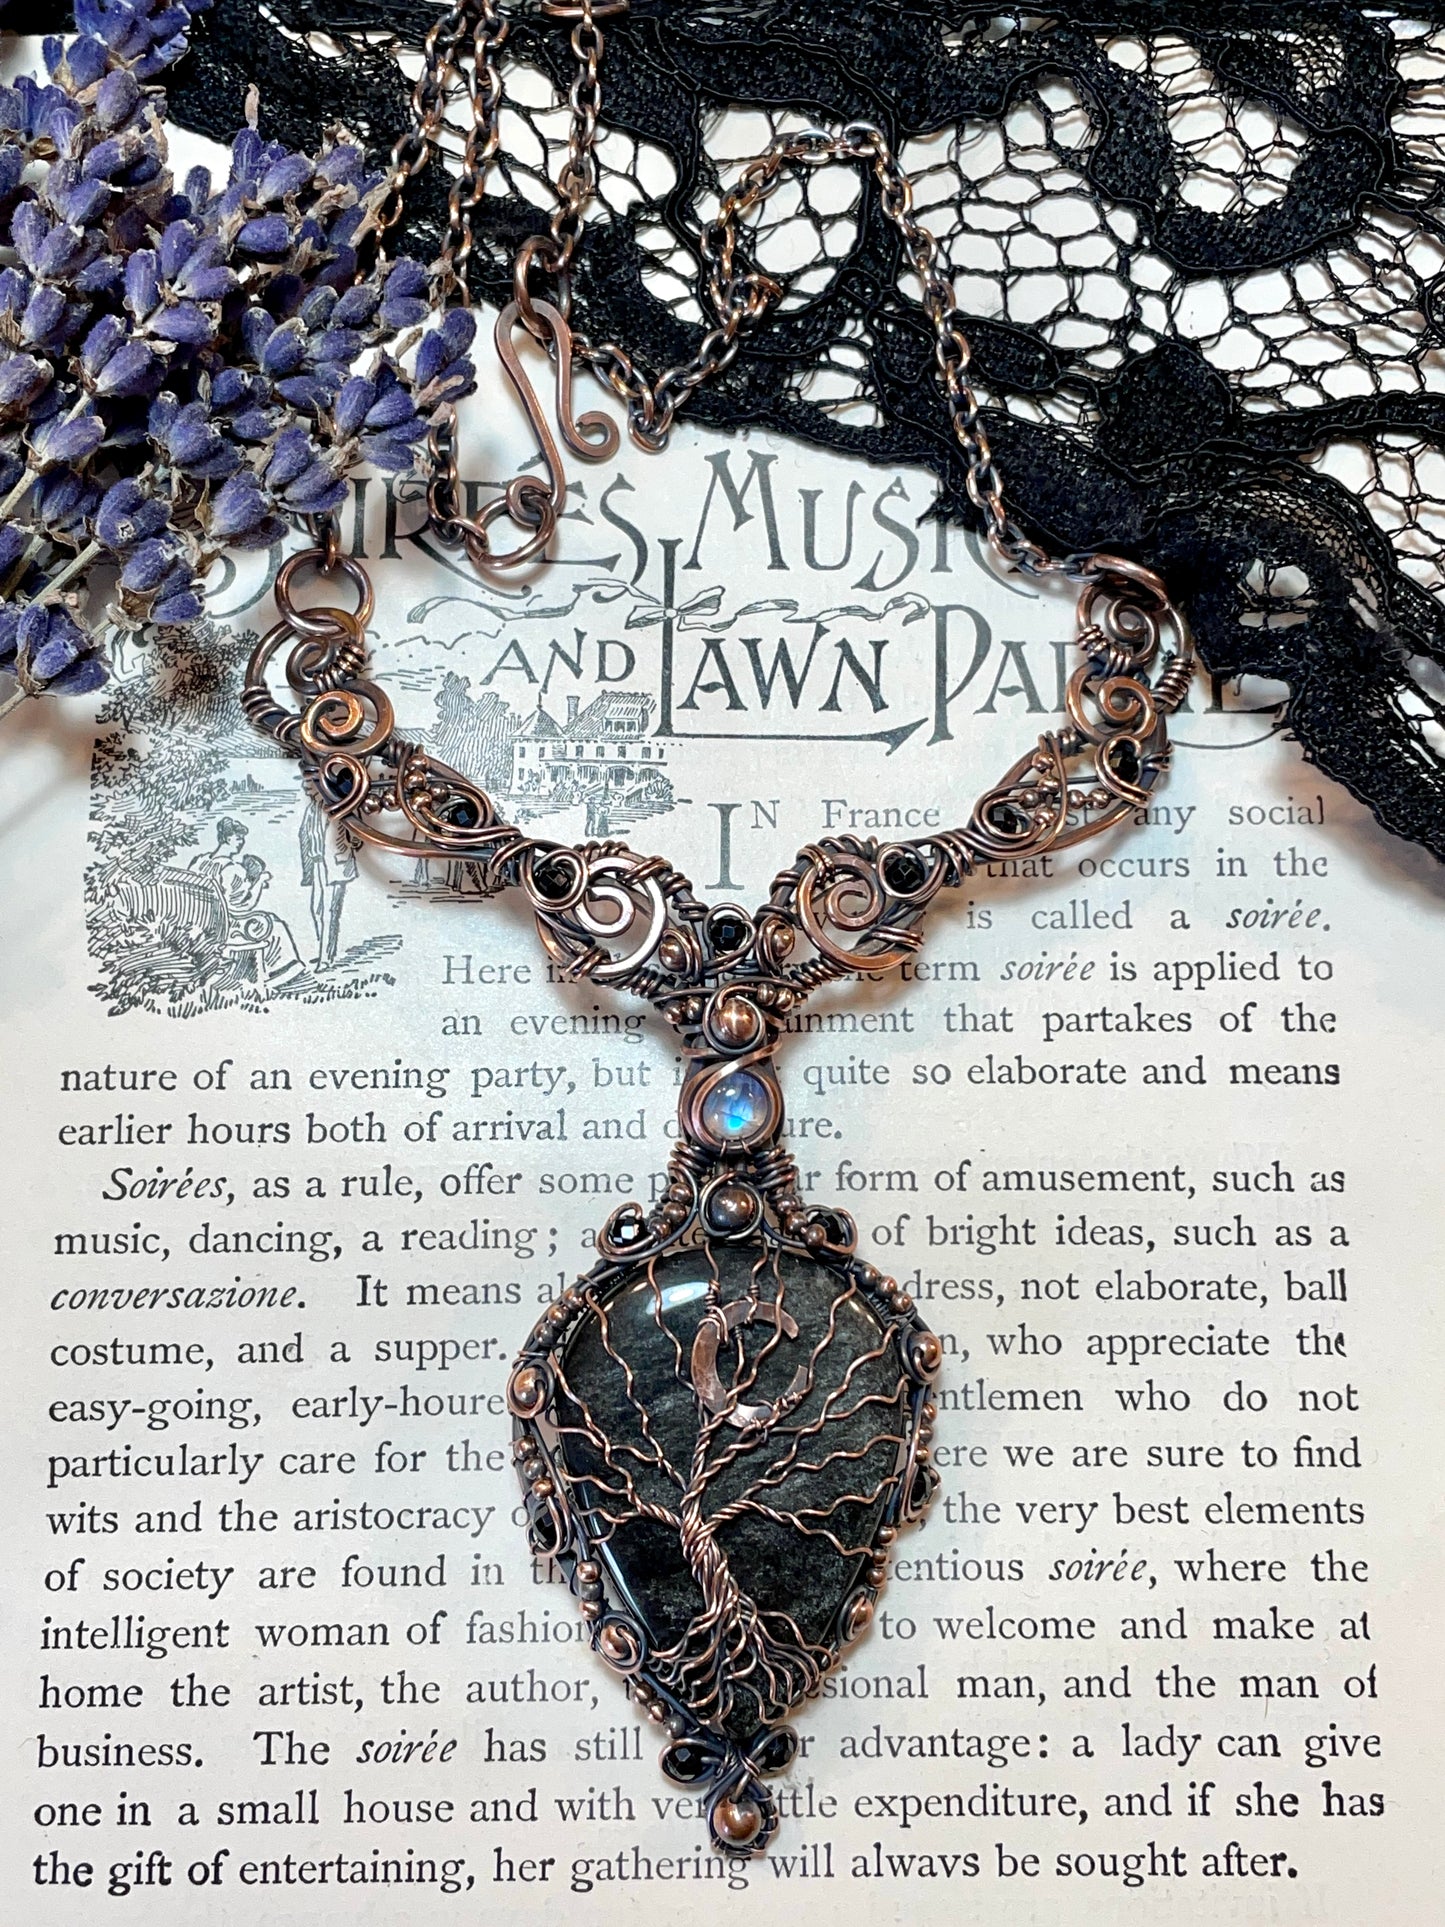 Silver Sheen Obsidian Tree of Life Collar Amulet (Crescent Moon) in Copper